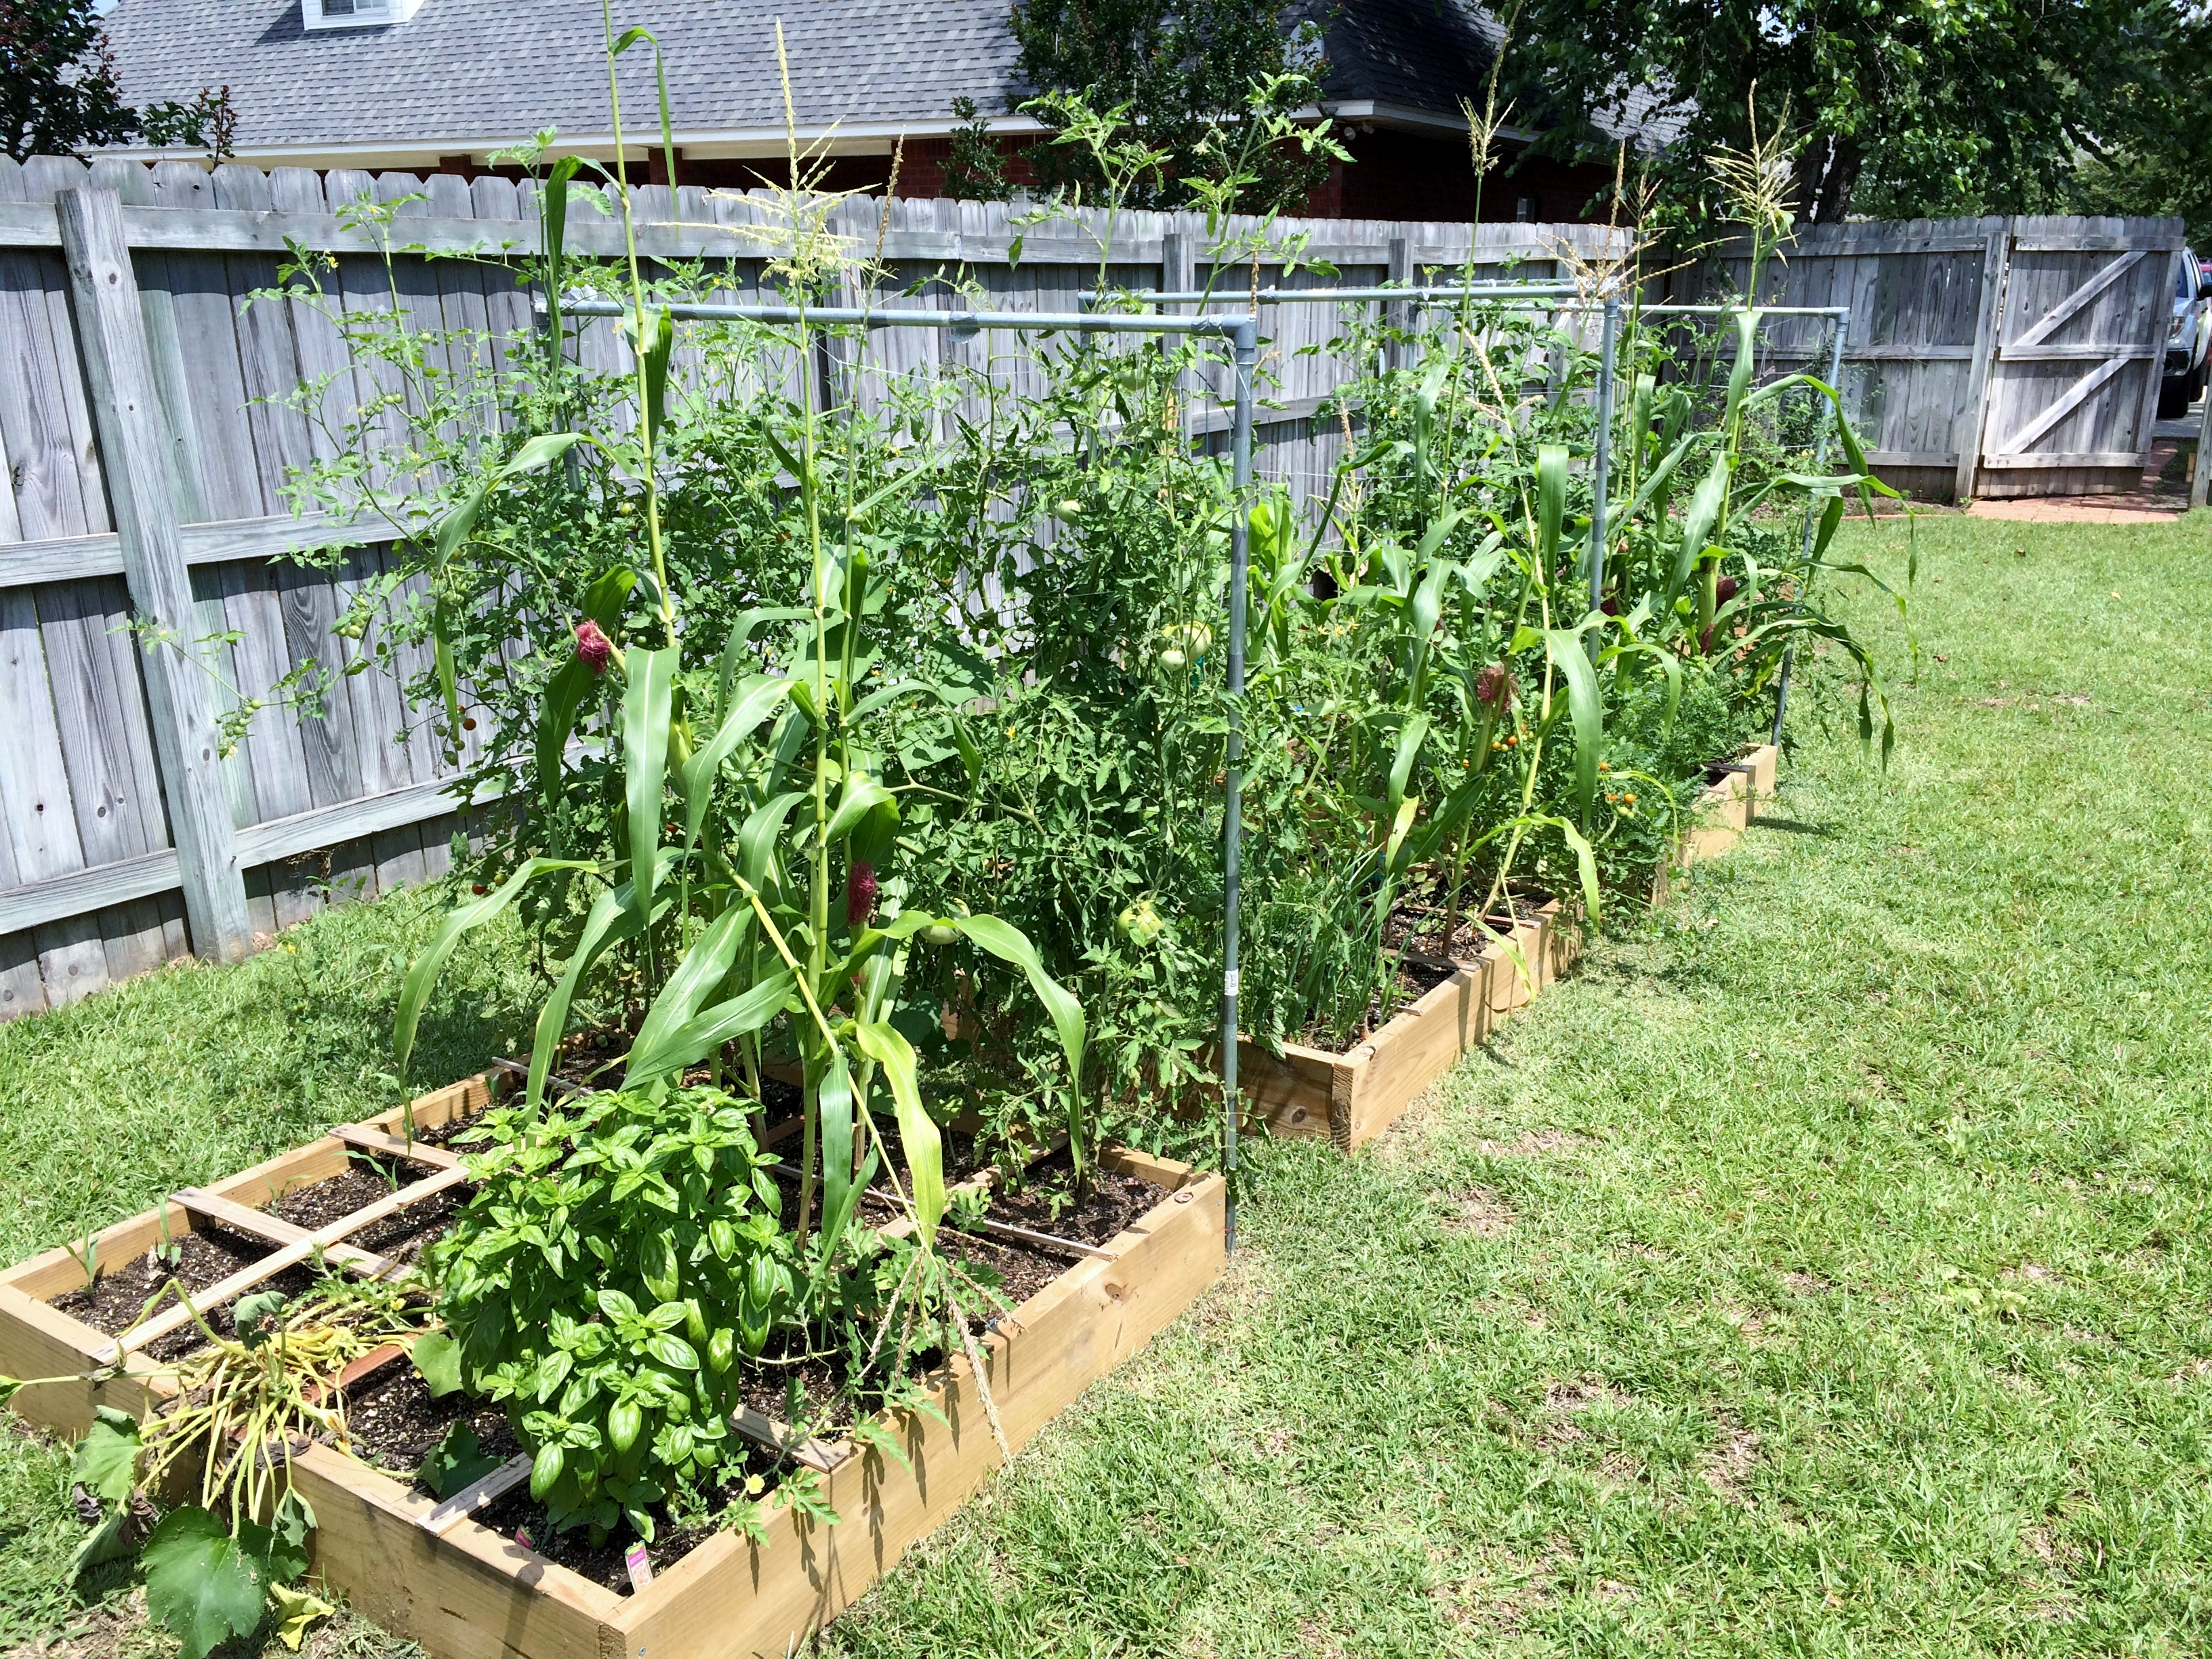 Get an Early Start on Spring Veggies | Gardening in the Panhandle